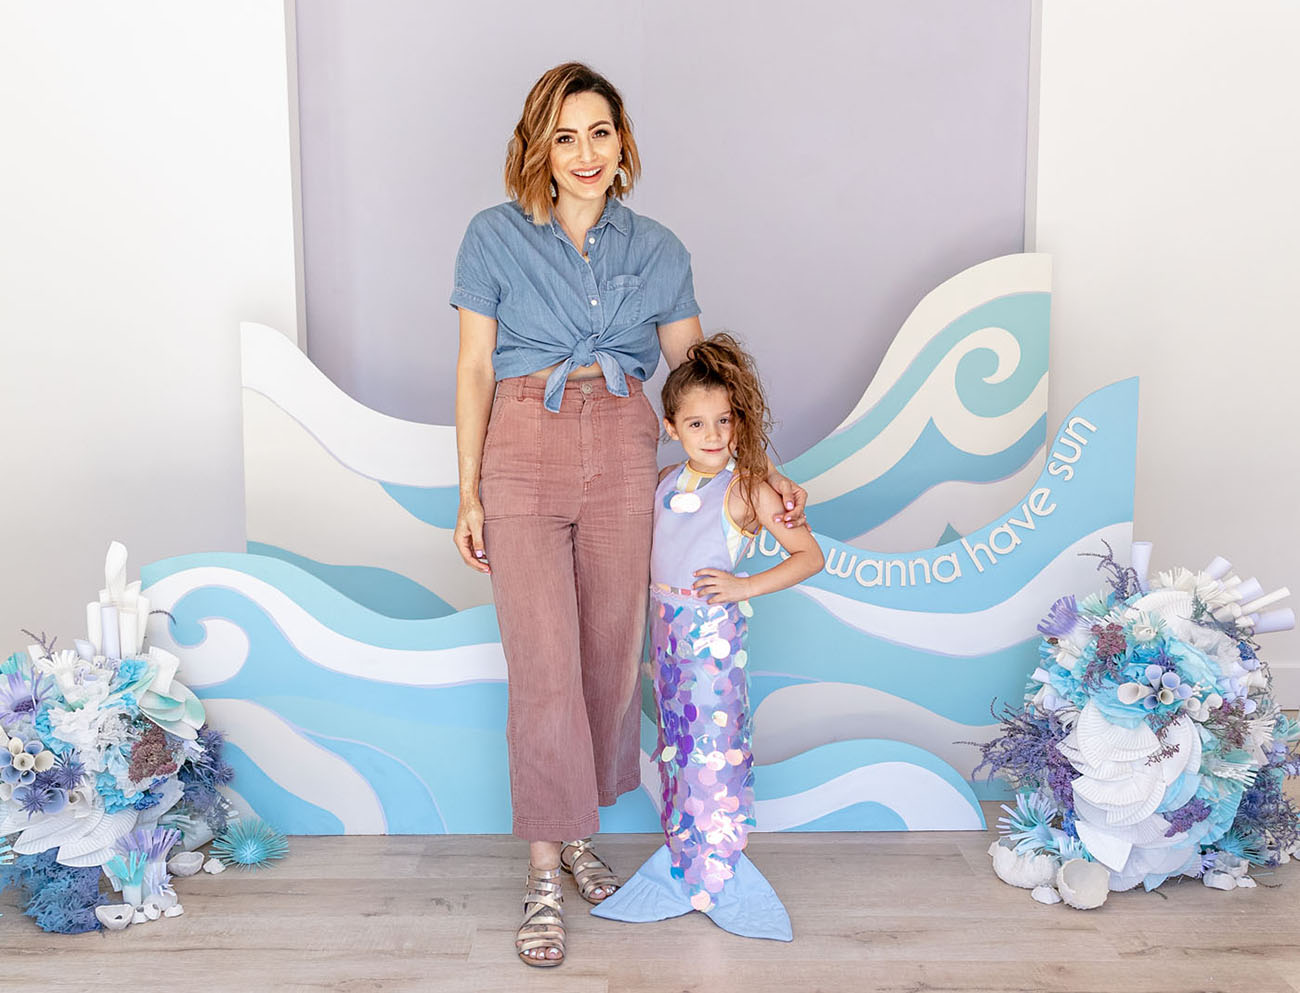 "Girls Just Wanna Have Sun" It's a Mermaid Birthday Party!